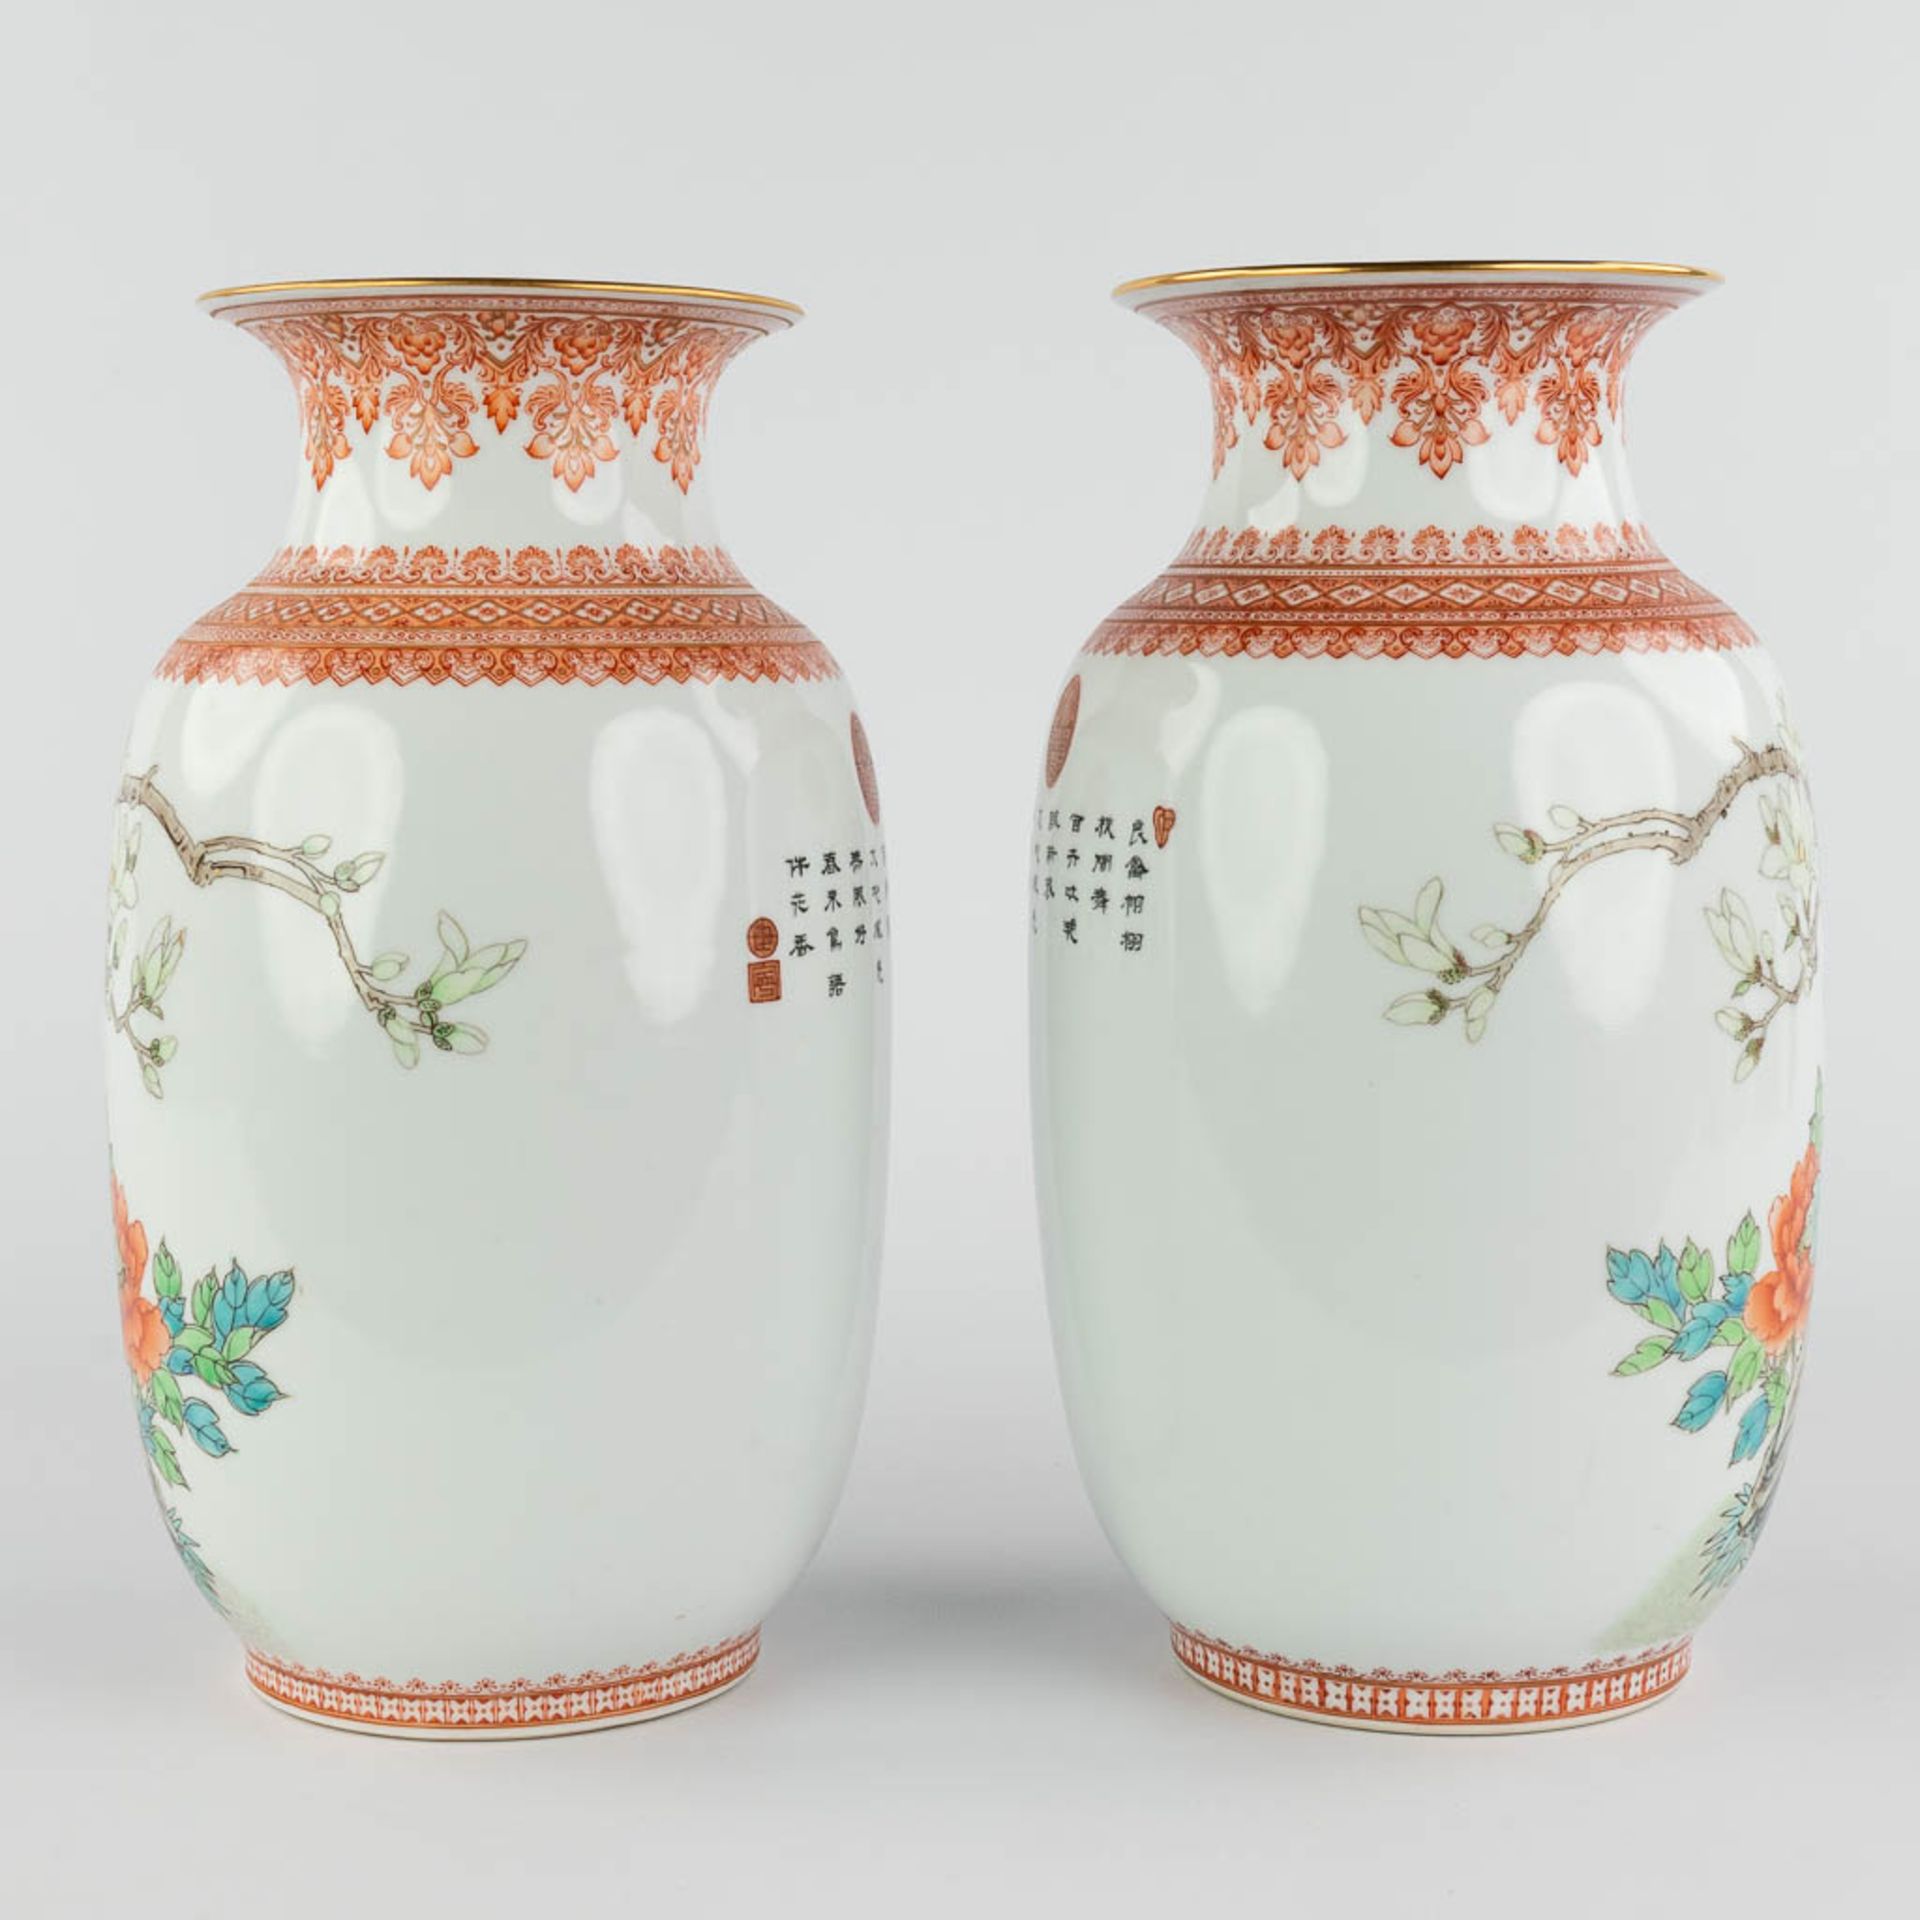 A pair of Chinese vases with bird decor, spring blossoms and peonies. 20th C. (H:32 x D:18 cm) - Bild 3 aus 12